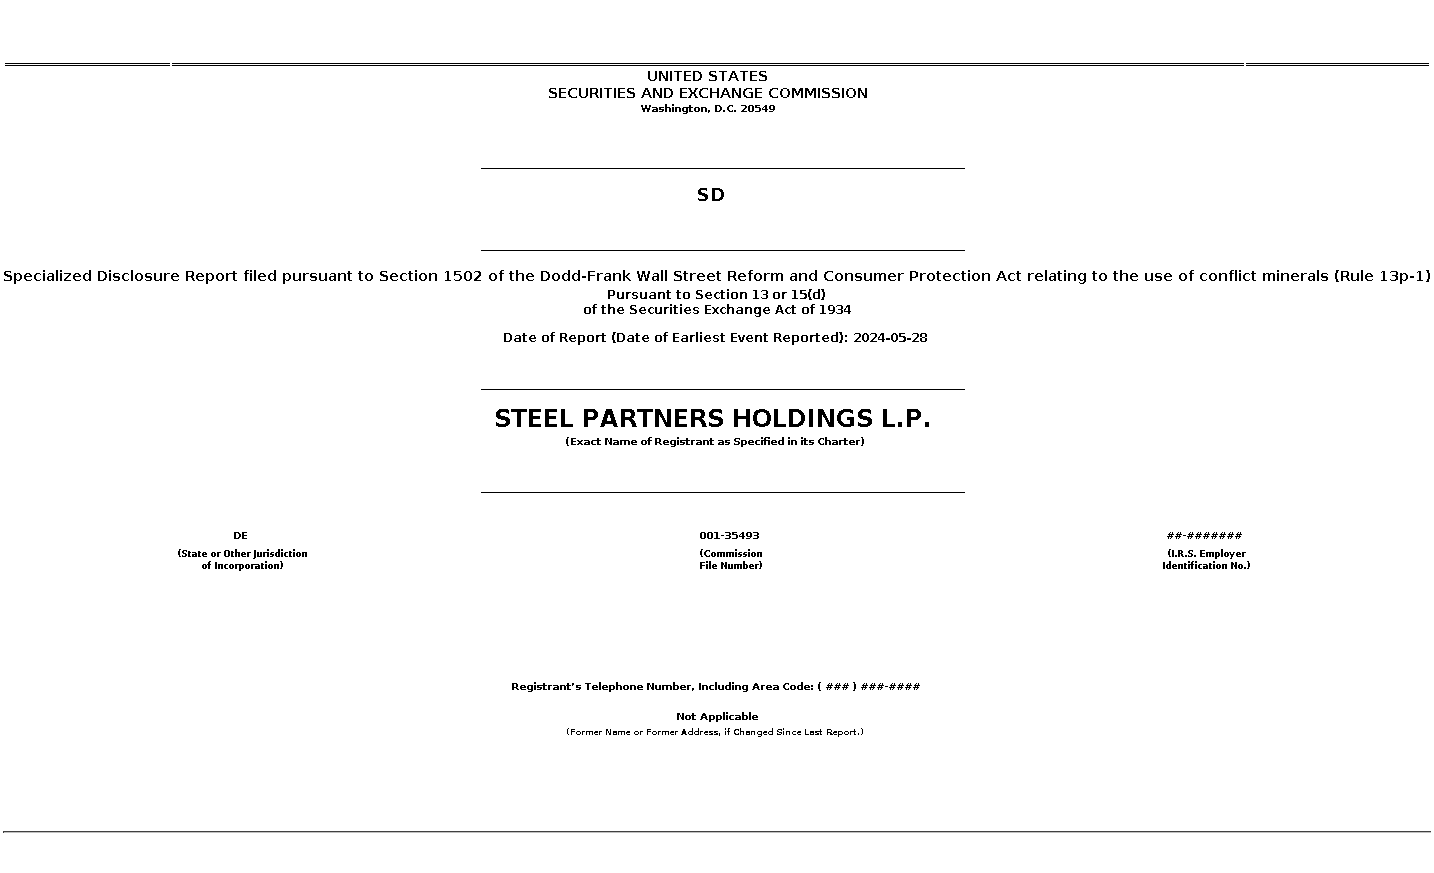 SPLP : SD Specialized Disclosure Report filed pursuant to Section 1502 of the Dodd-Frank Wall Street Reform and Consumer Protection Act relating to the use of conflict minerals (Rule 13p-1)